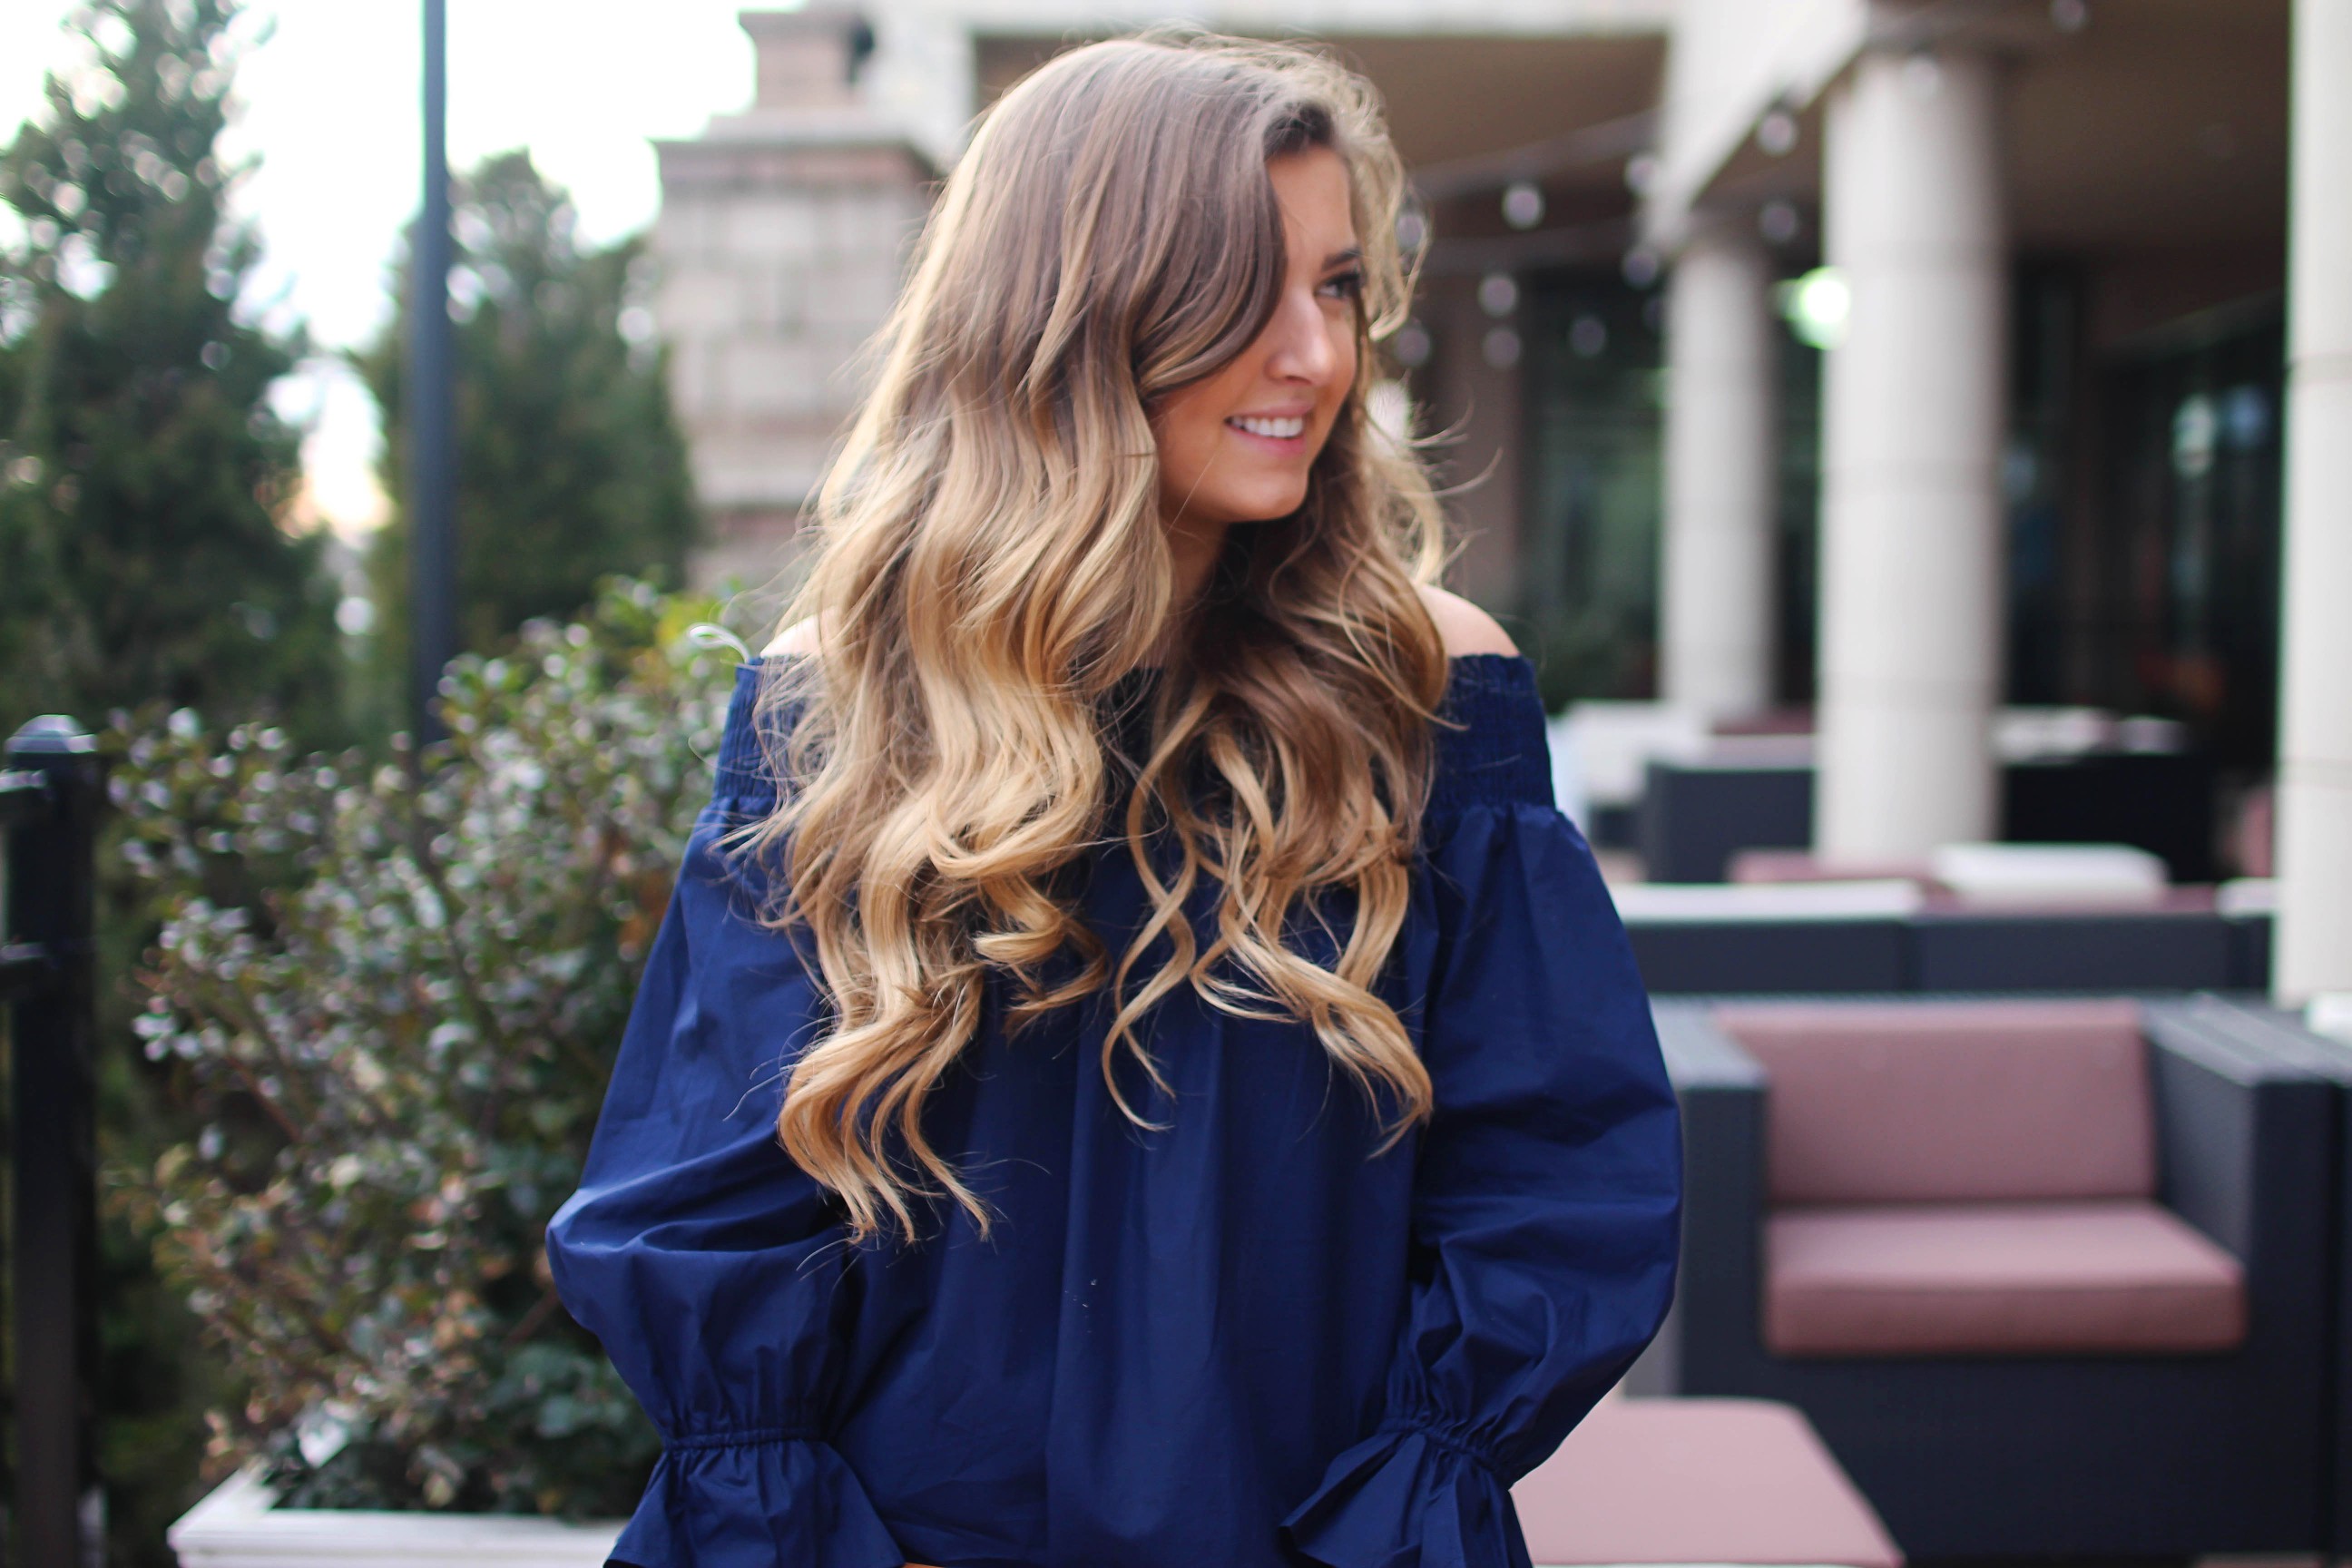 The cutest and most unique off the shoulder top you'll ever find! I love the bow on the back of the off the shoulder top and the unique sleeves. I paired it with the cutest tassel clutch and Tory Burch sandals! By Lauren Lindmark on daily dose of charm dailydoseofcharm.com